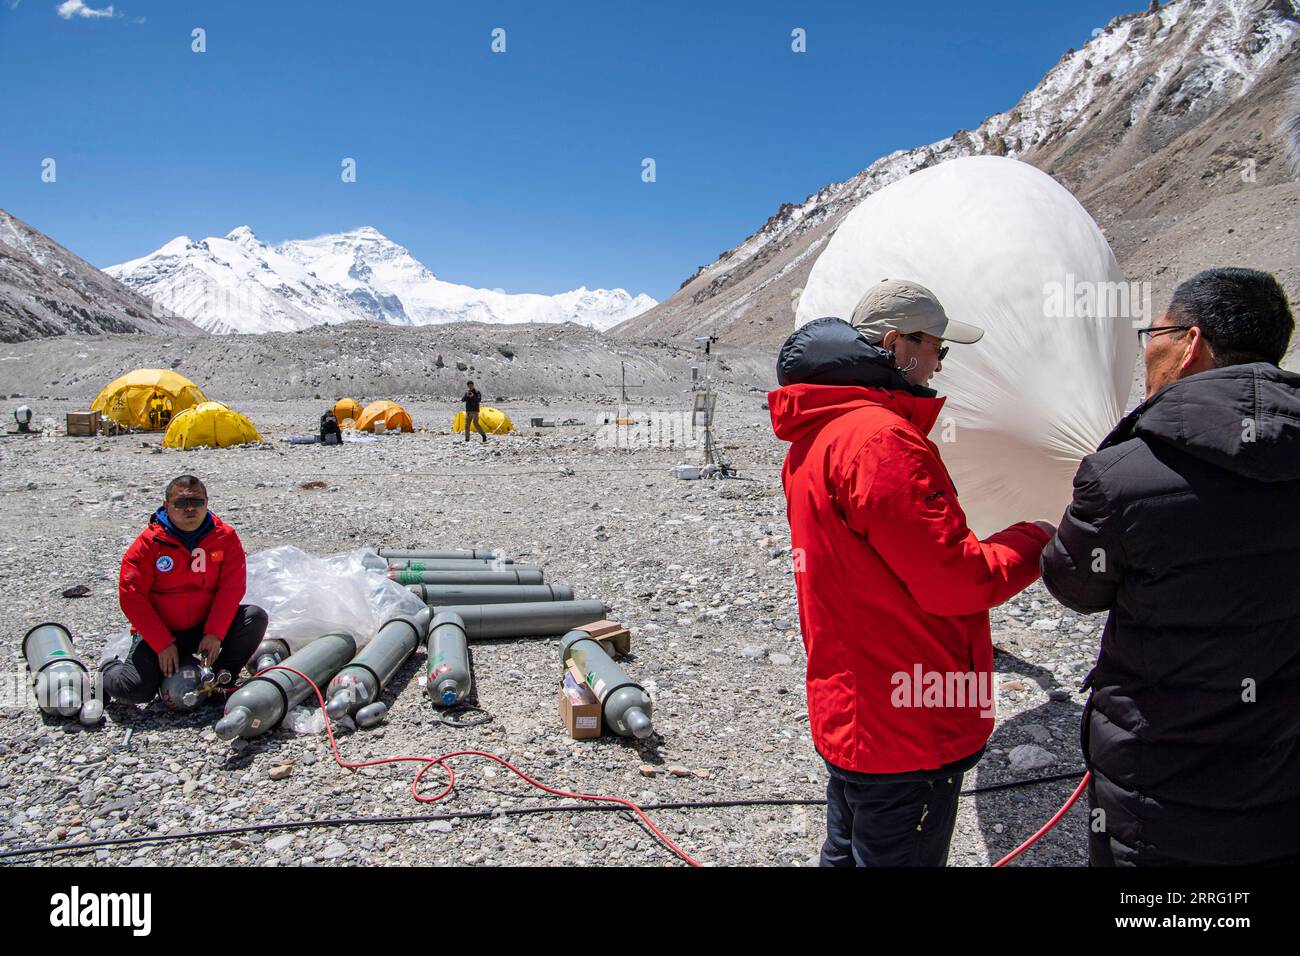 220503 -- MOUNT QOMOLANGMA BASE CAMP, May 3, 2022 -- Scientific research members inflate a weather balloon at the Mount Qomolangma base camp on May 3, 2022. China has started a new comprehensive scientific expedition on Mount Qomolangma, the world s highest peak on the China-Nepal border. Weather factors such as temperature, wind speed and humidity will directly affect the completion of scientific research tasks and the safety of research personnel at high altitude. Therefore, a meteorological support team has been launched in safeguards of the scientific expedition. The team is composed of st Stock Photo